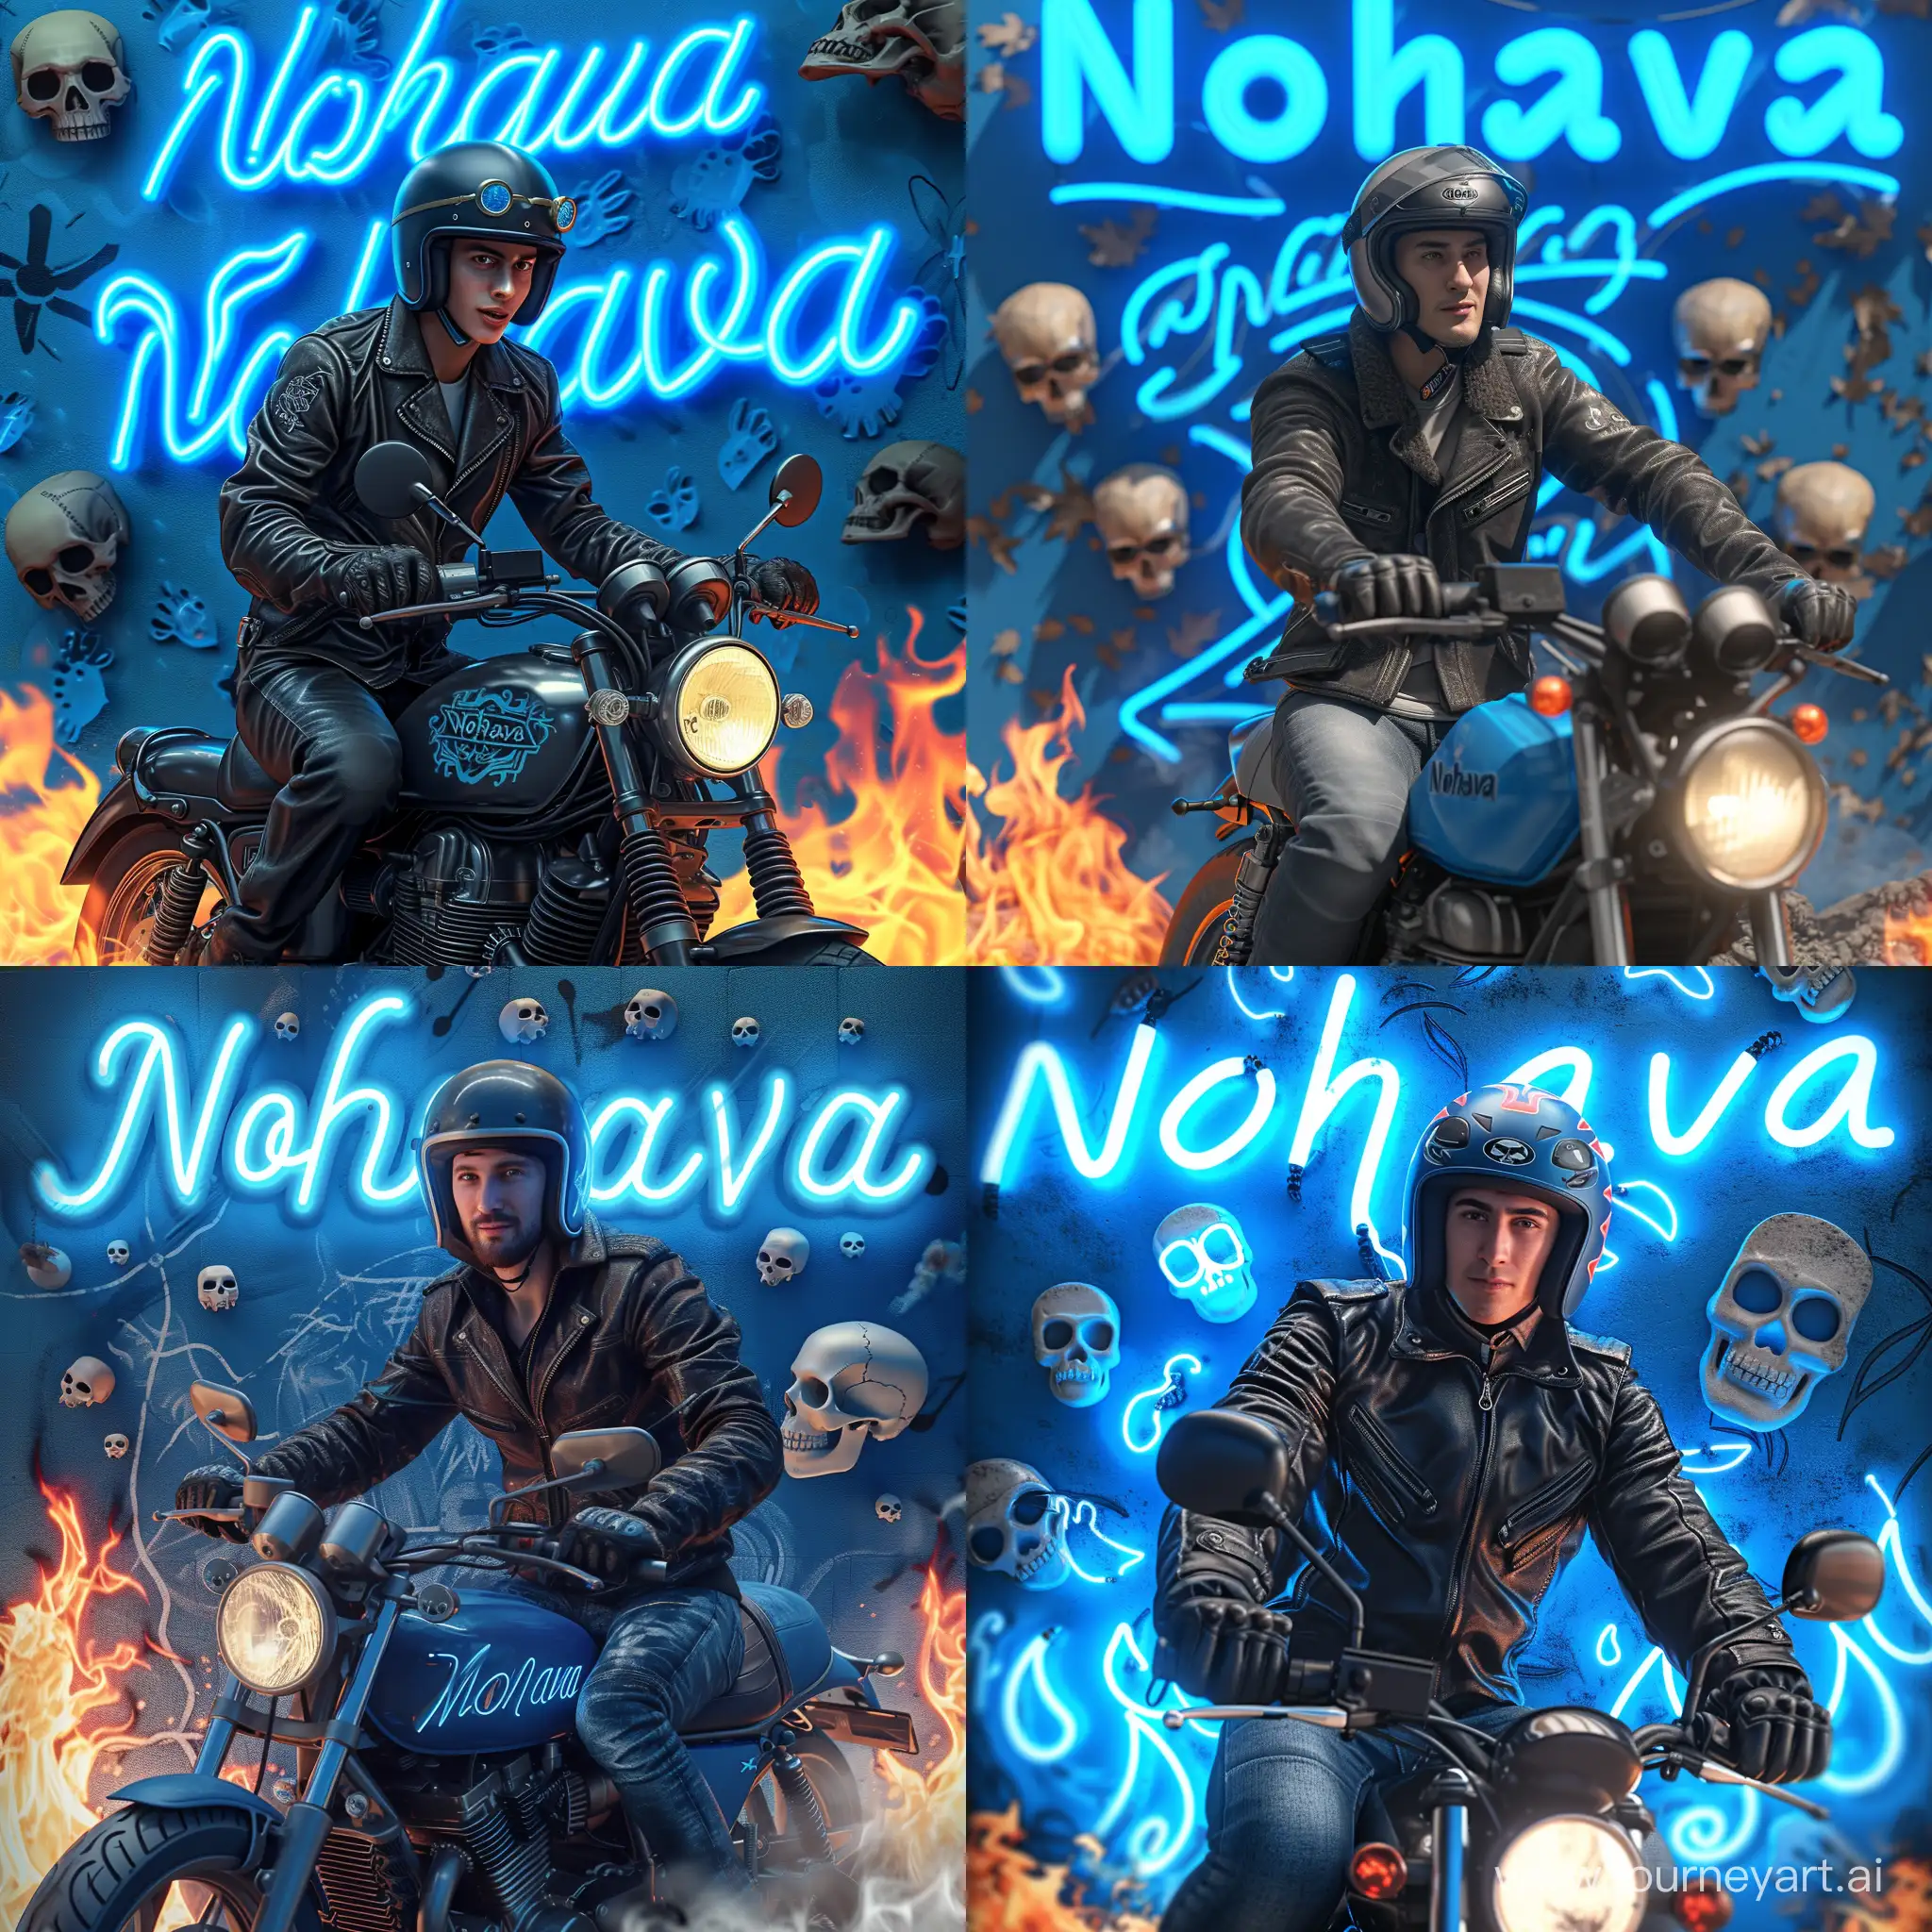 Create a 3D illusion for a profile picture where a 23-year-old cool guy in a leather jacket is riding a RX100. Wearing gloves and a helmet, he looks adventurous and daring. The background features his stylish name “Nohava” in big and capital blue neon light fonts on a blue wall. There are also flames and skulls to make it appear as if he is a rebel.